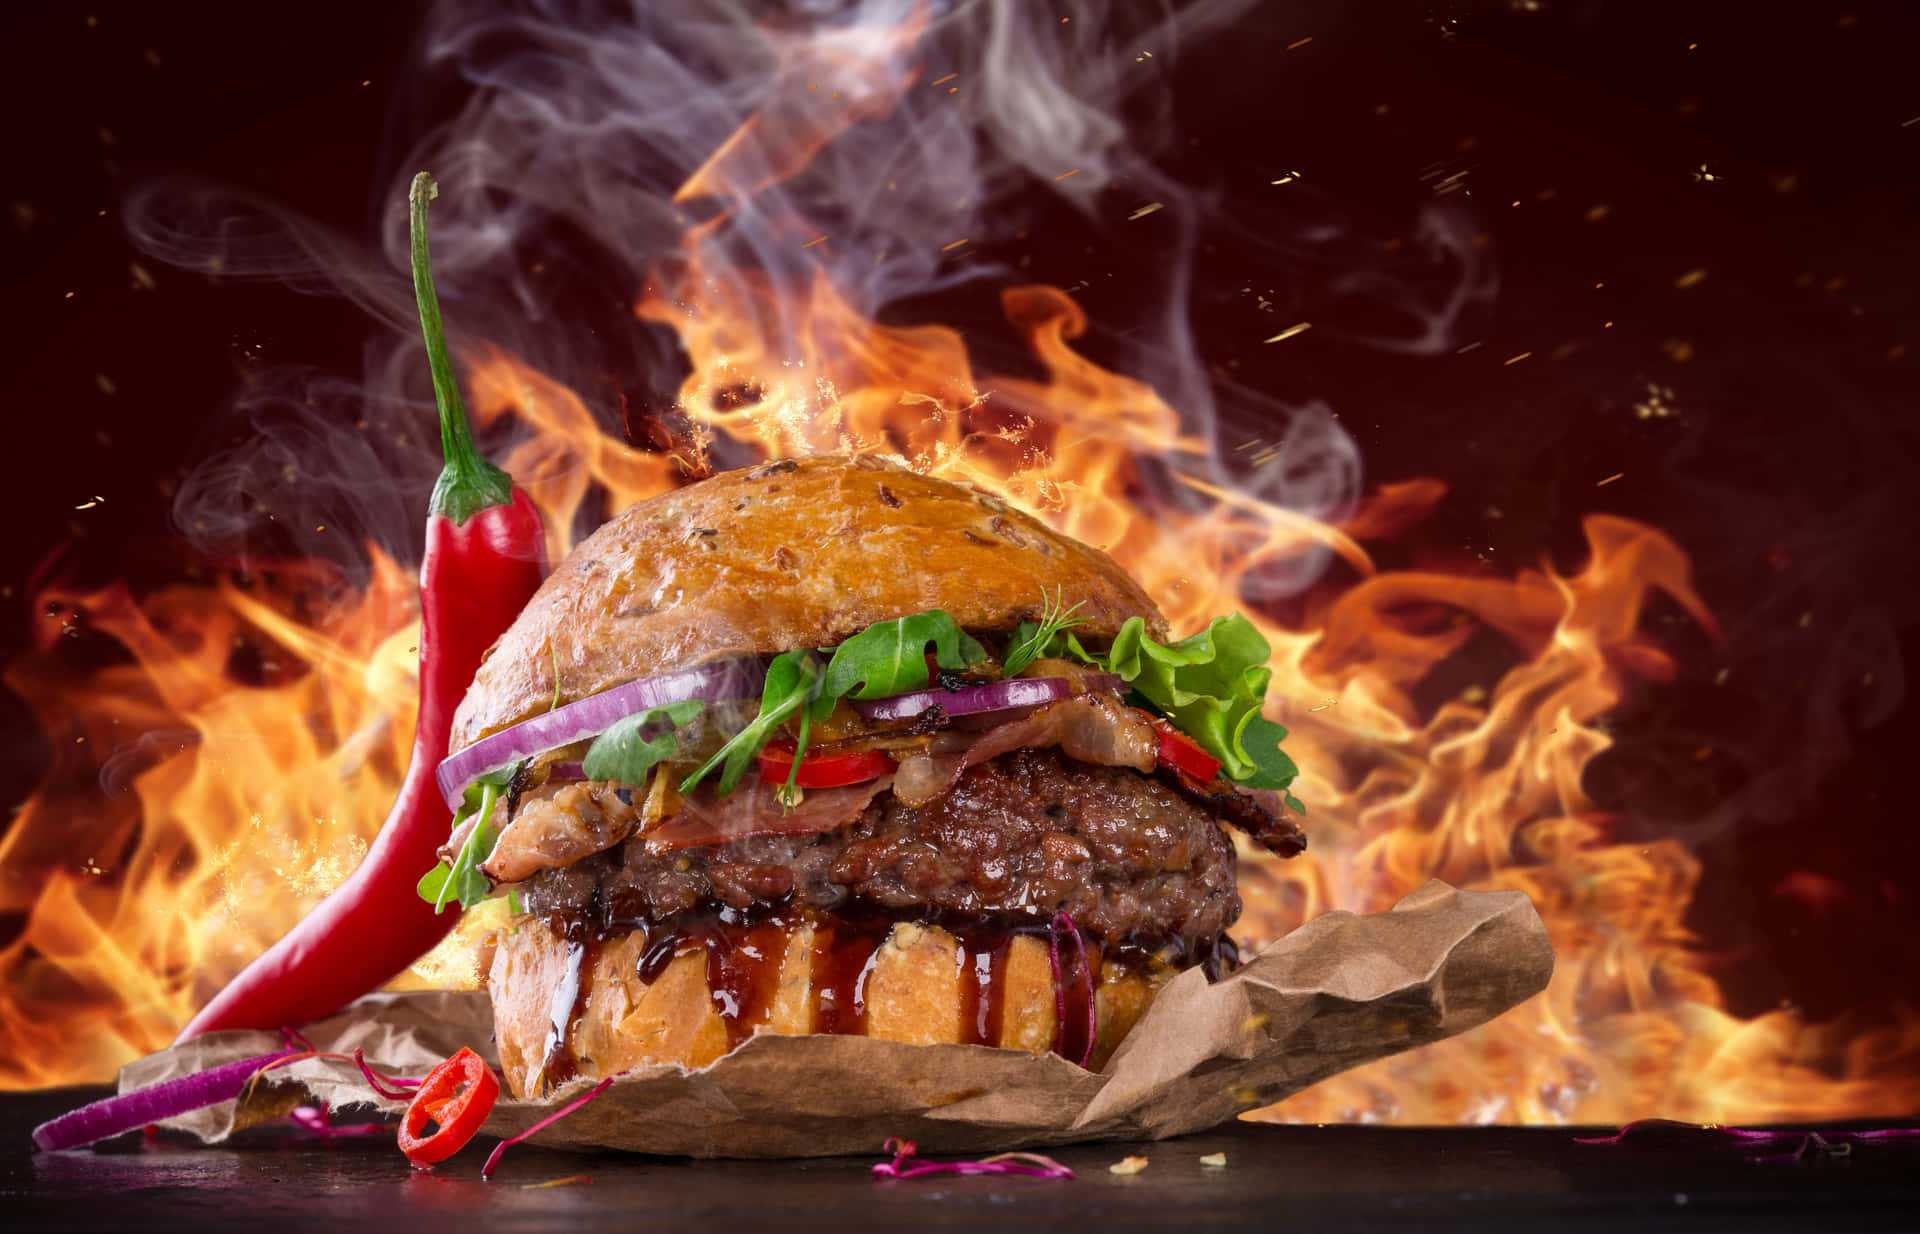 A Burger On Fire With Chili Peppers